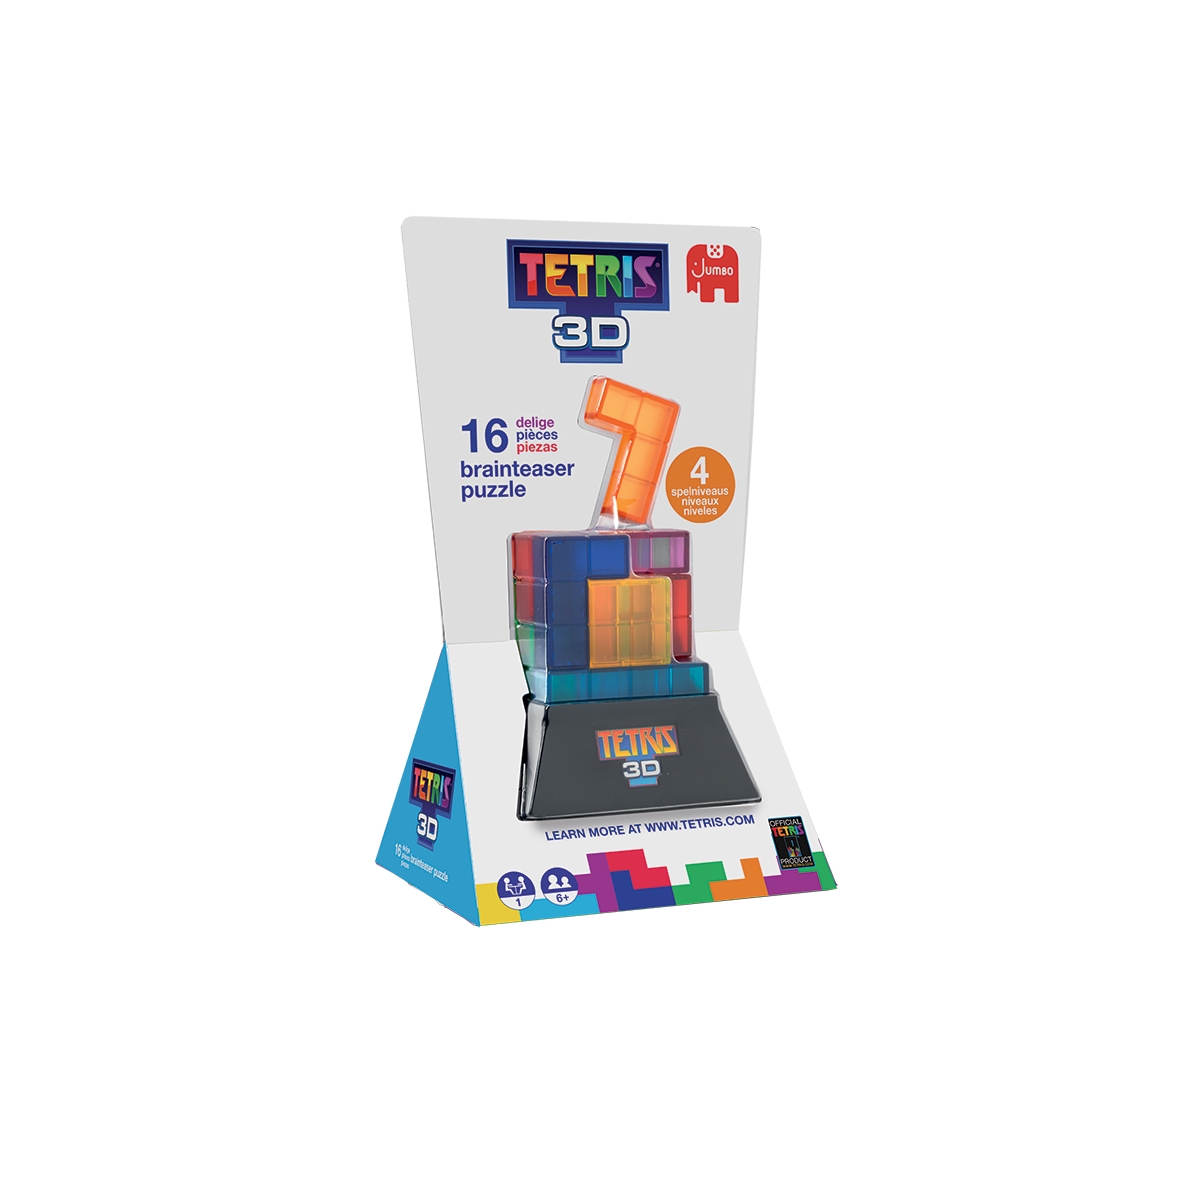 Play an extremely confusing game of Tetris in 3D with Blockability 3d  [Windows 8]